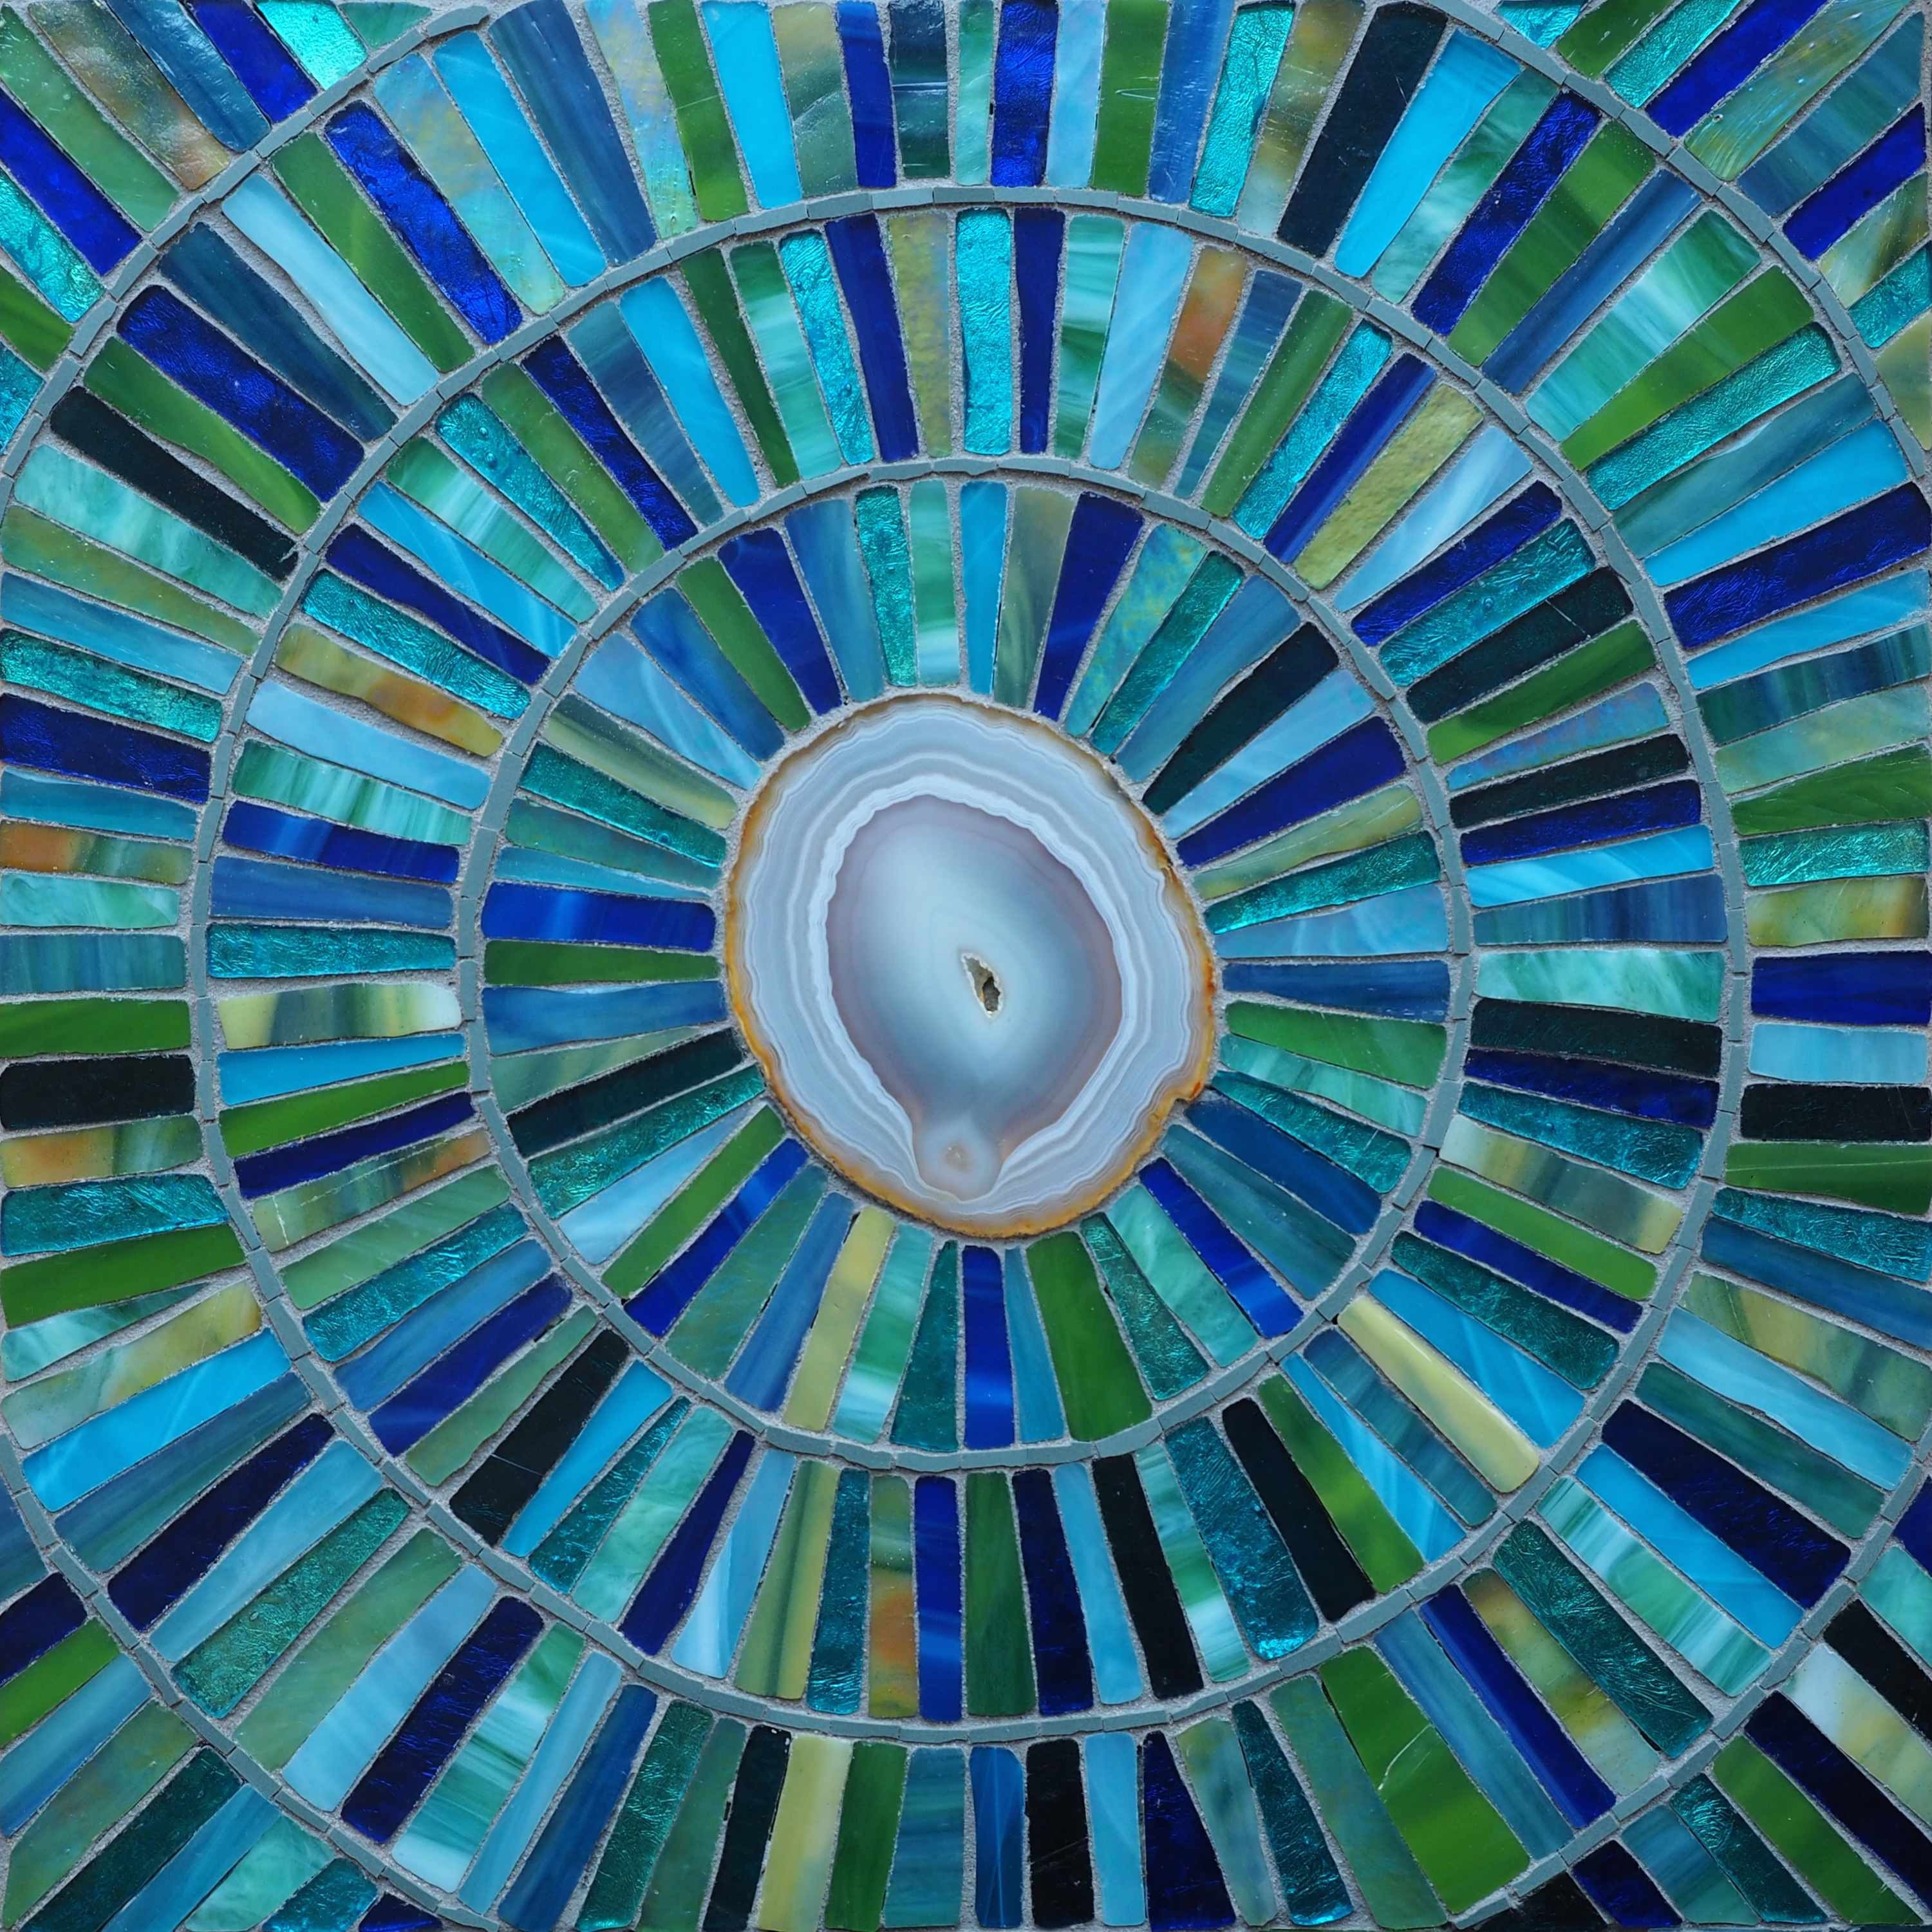 Stained Glass and Mosaics by Siobhan Allen - Welcome!